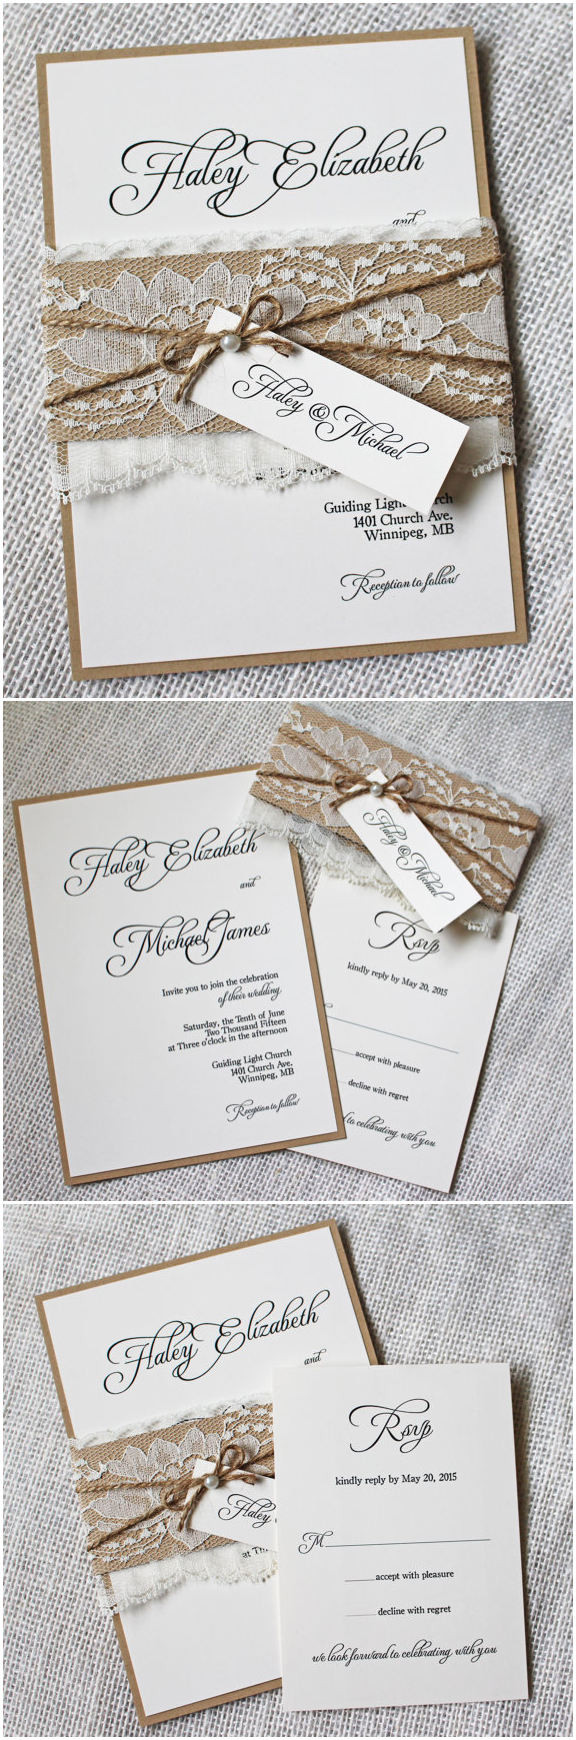 Wedding Invitations Pictures
 Top 10 Rustic Wedding Invitations to WOW Your Guests